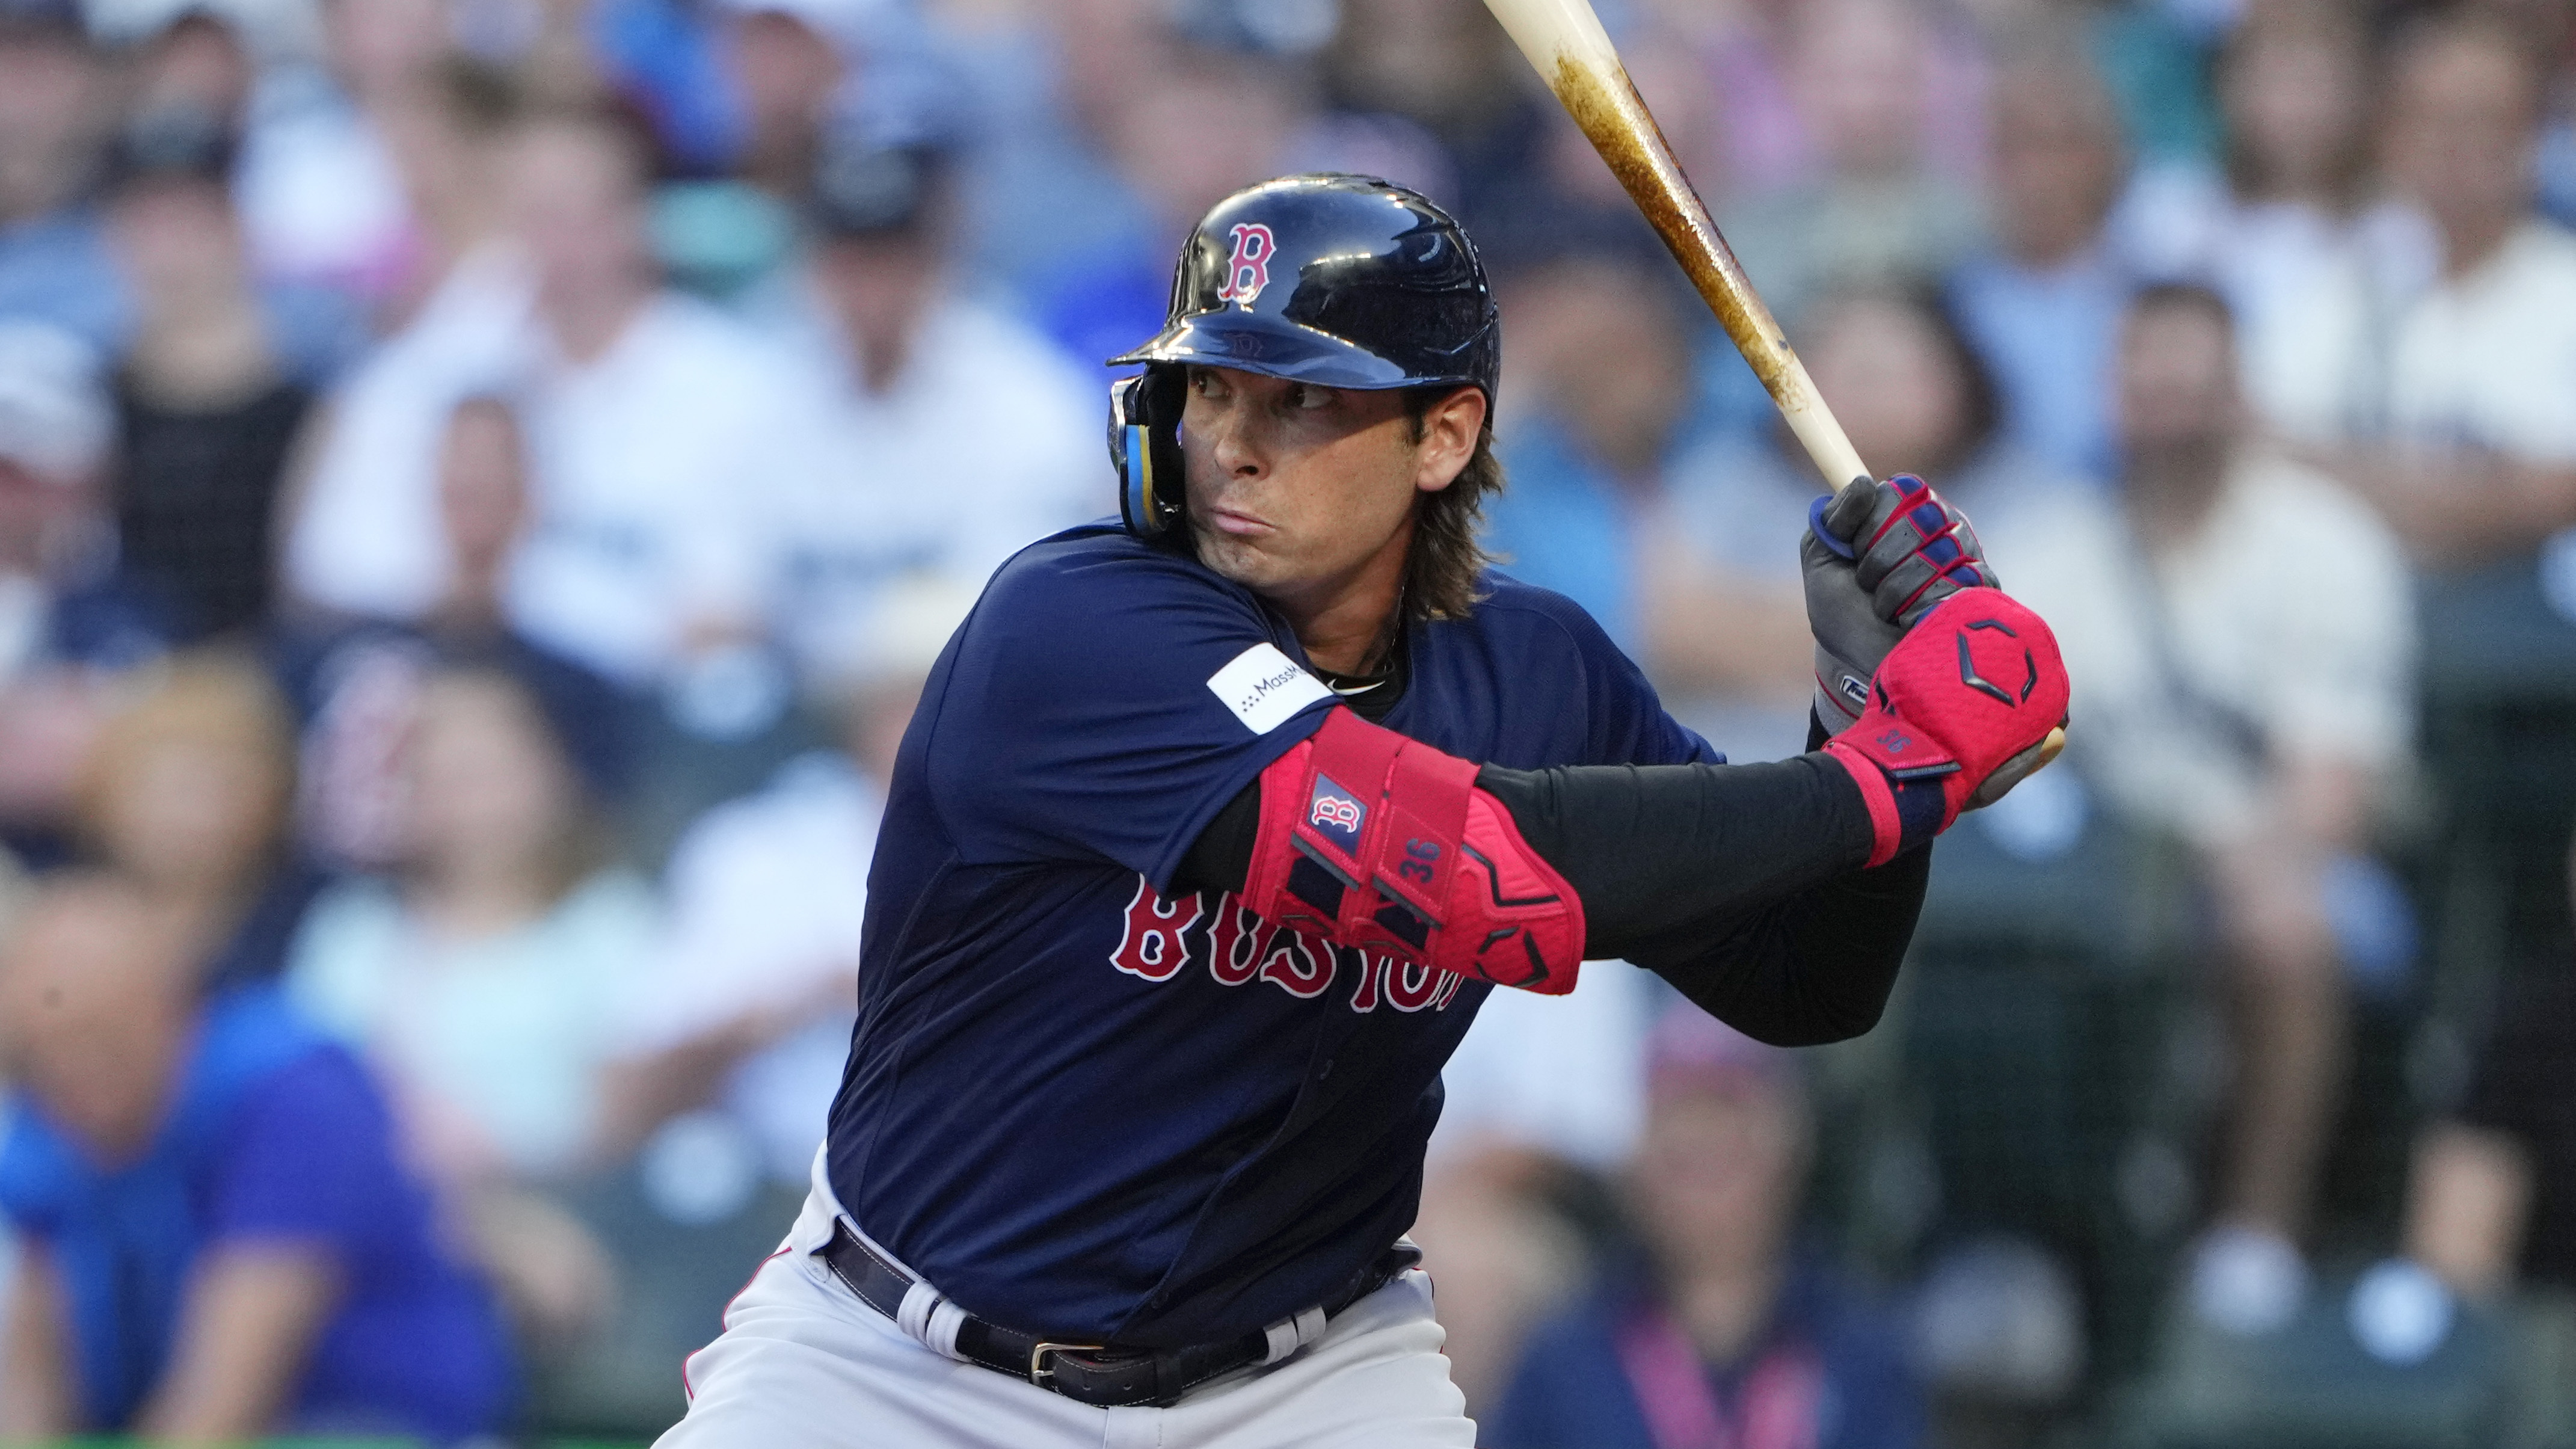 Pablo Reyes helps power Red Sox to win over Mariners, Sports